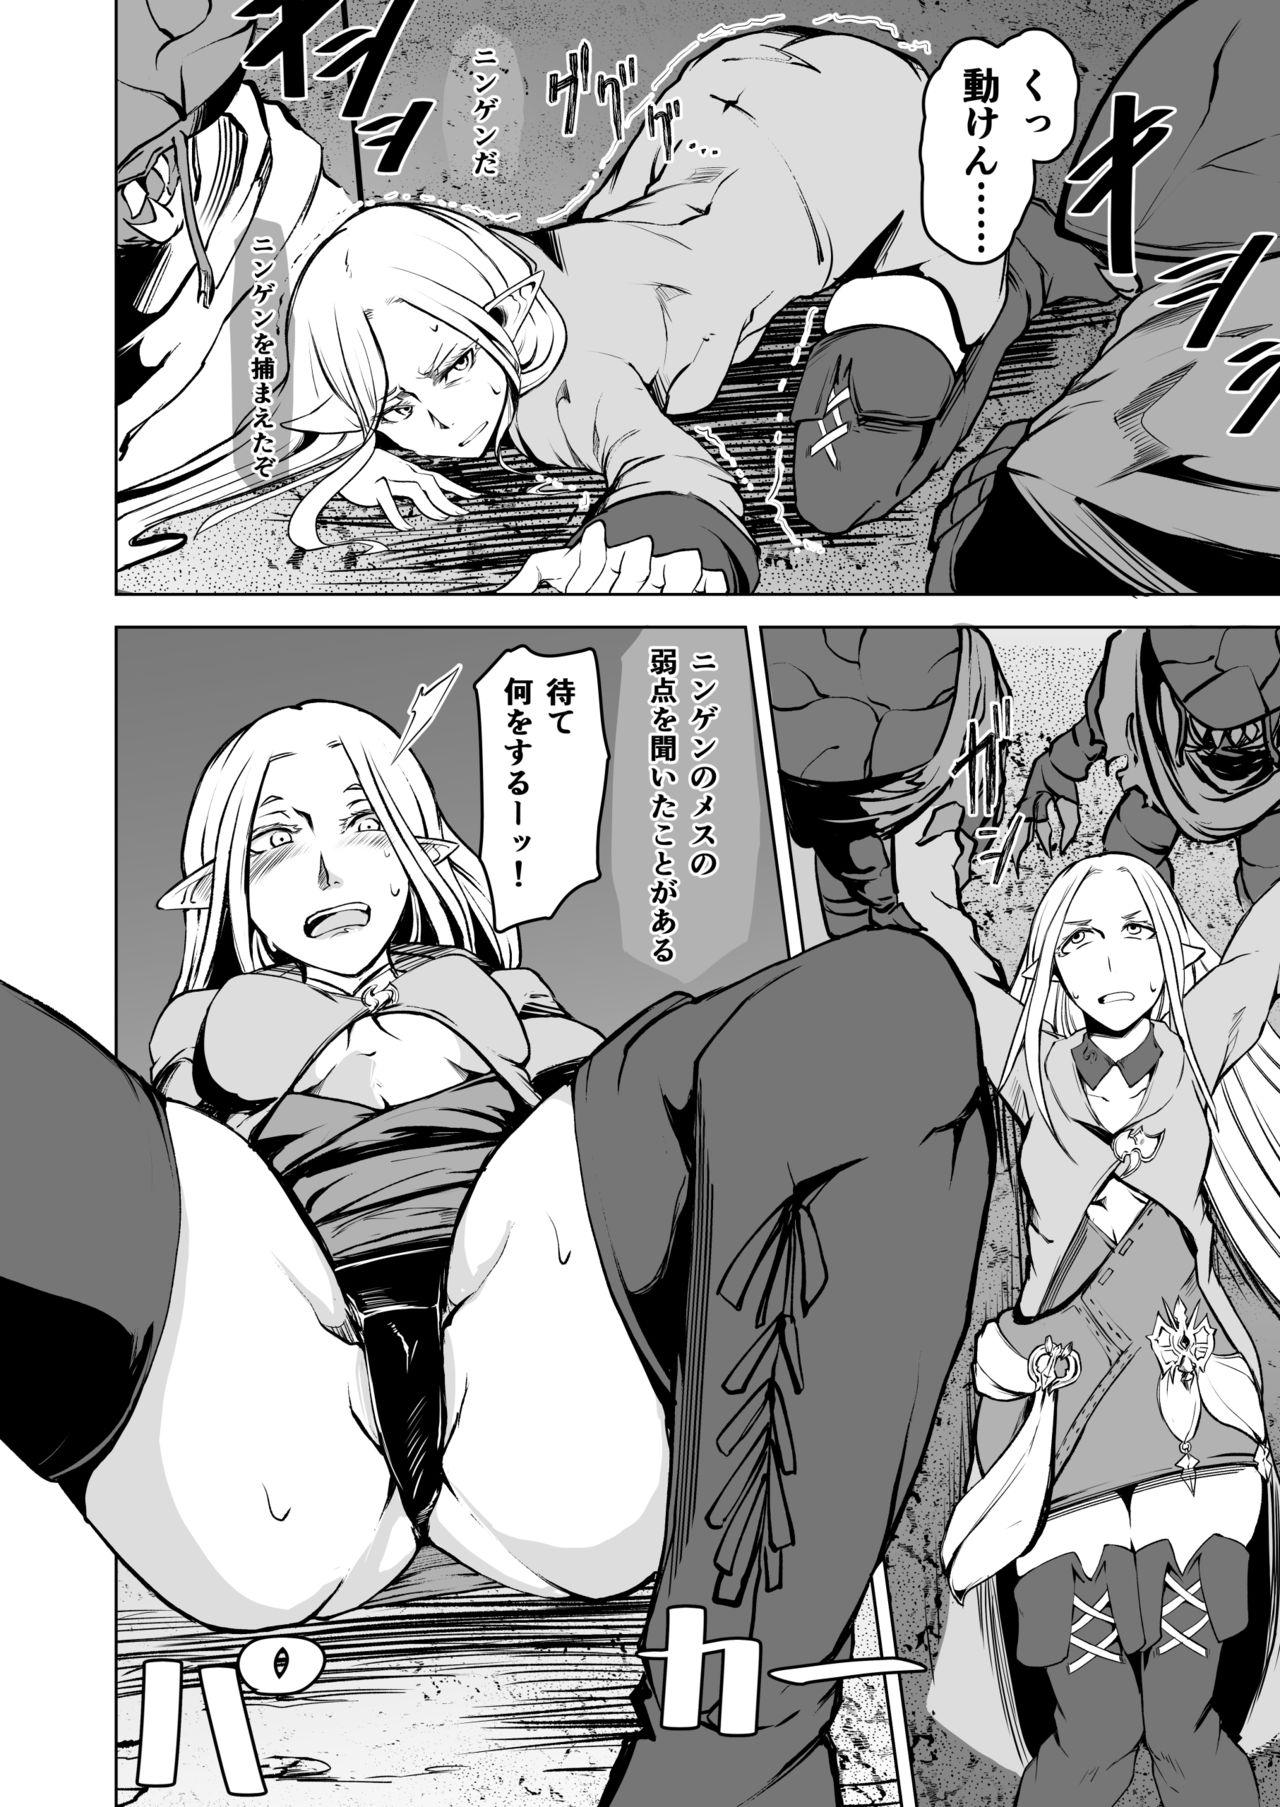 Hot FF14 REALM EROHORN - Final fantasy xiv Hairy Pussy - Page 7